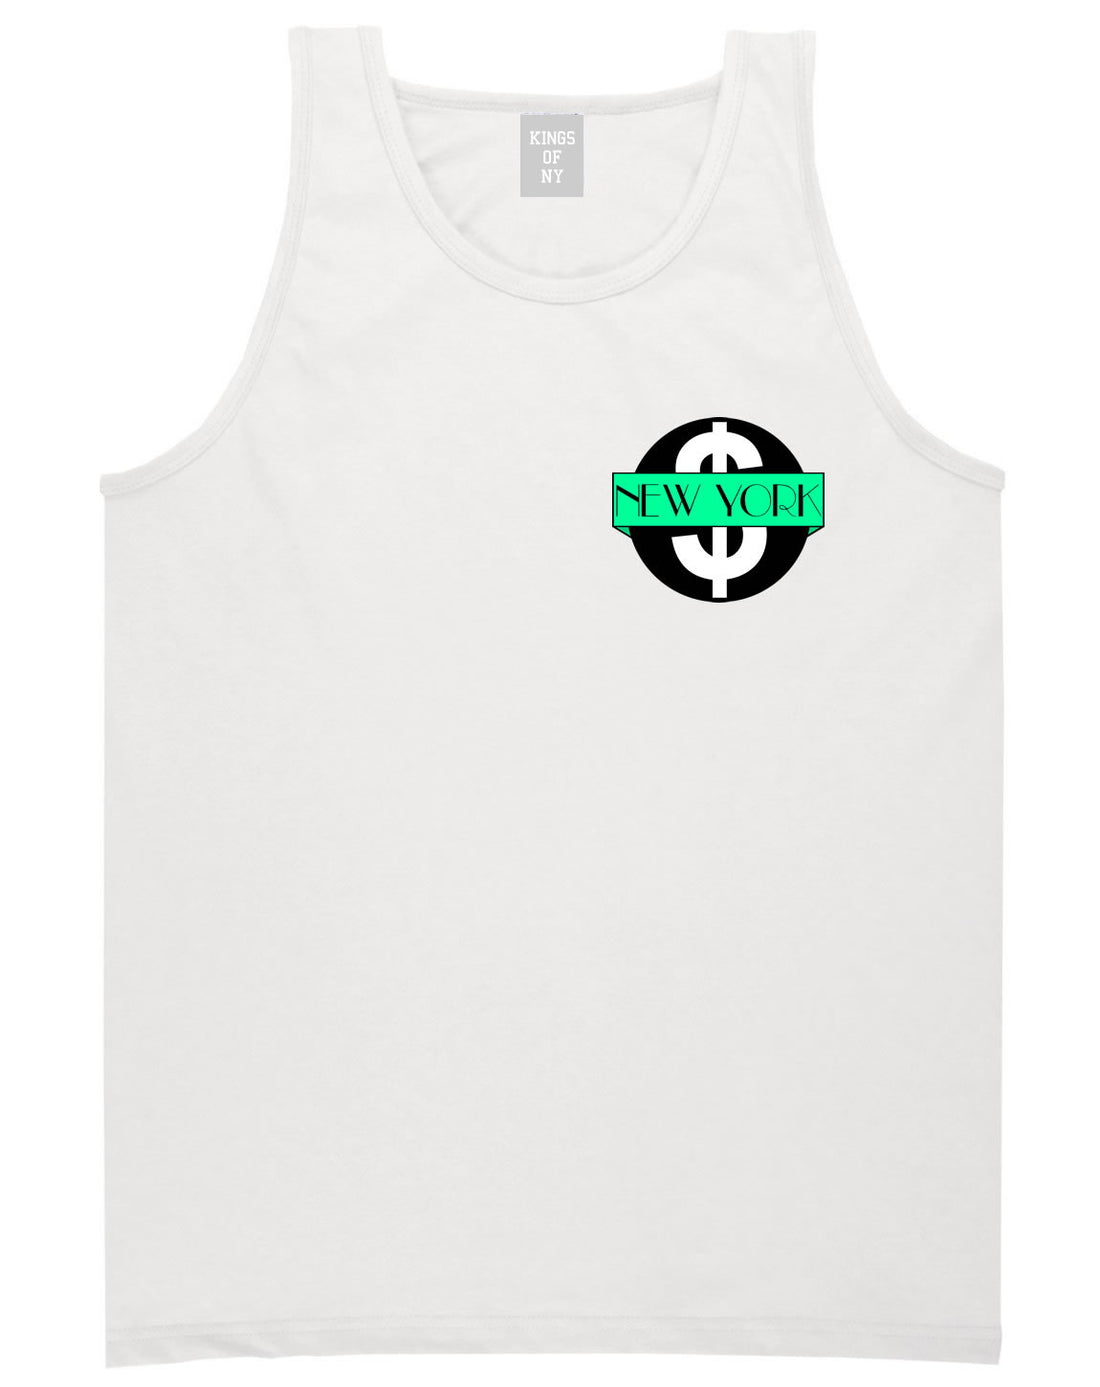 New York Mint Chest Logo Tank Top in White By Kings Of NY